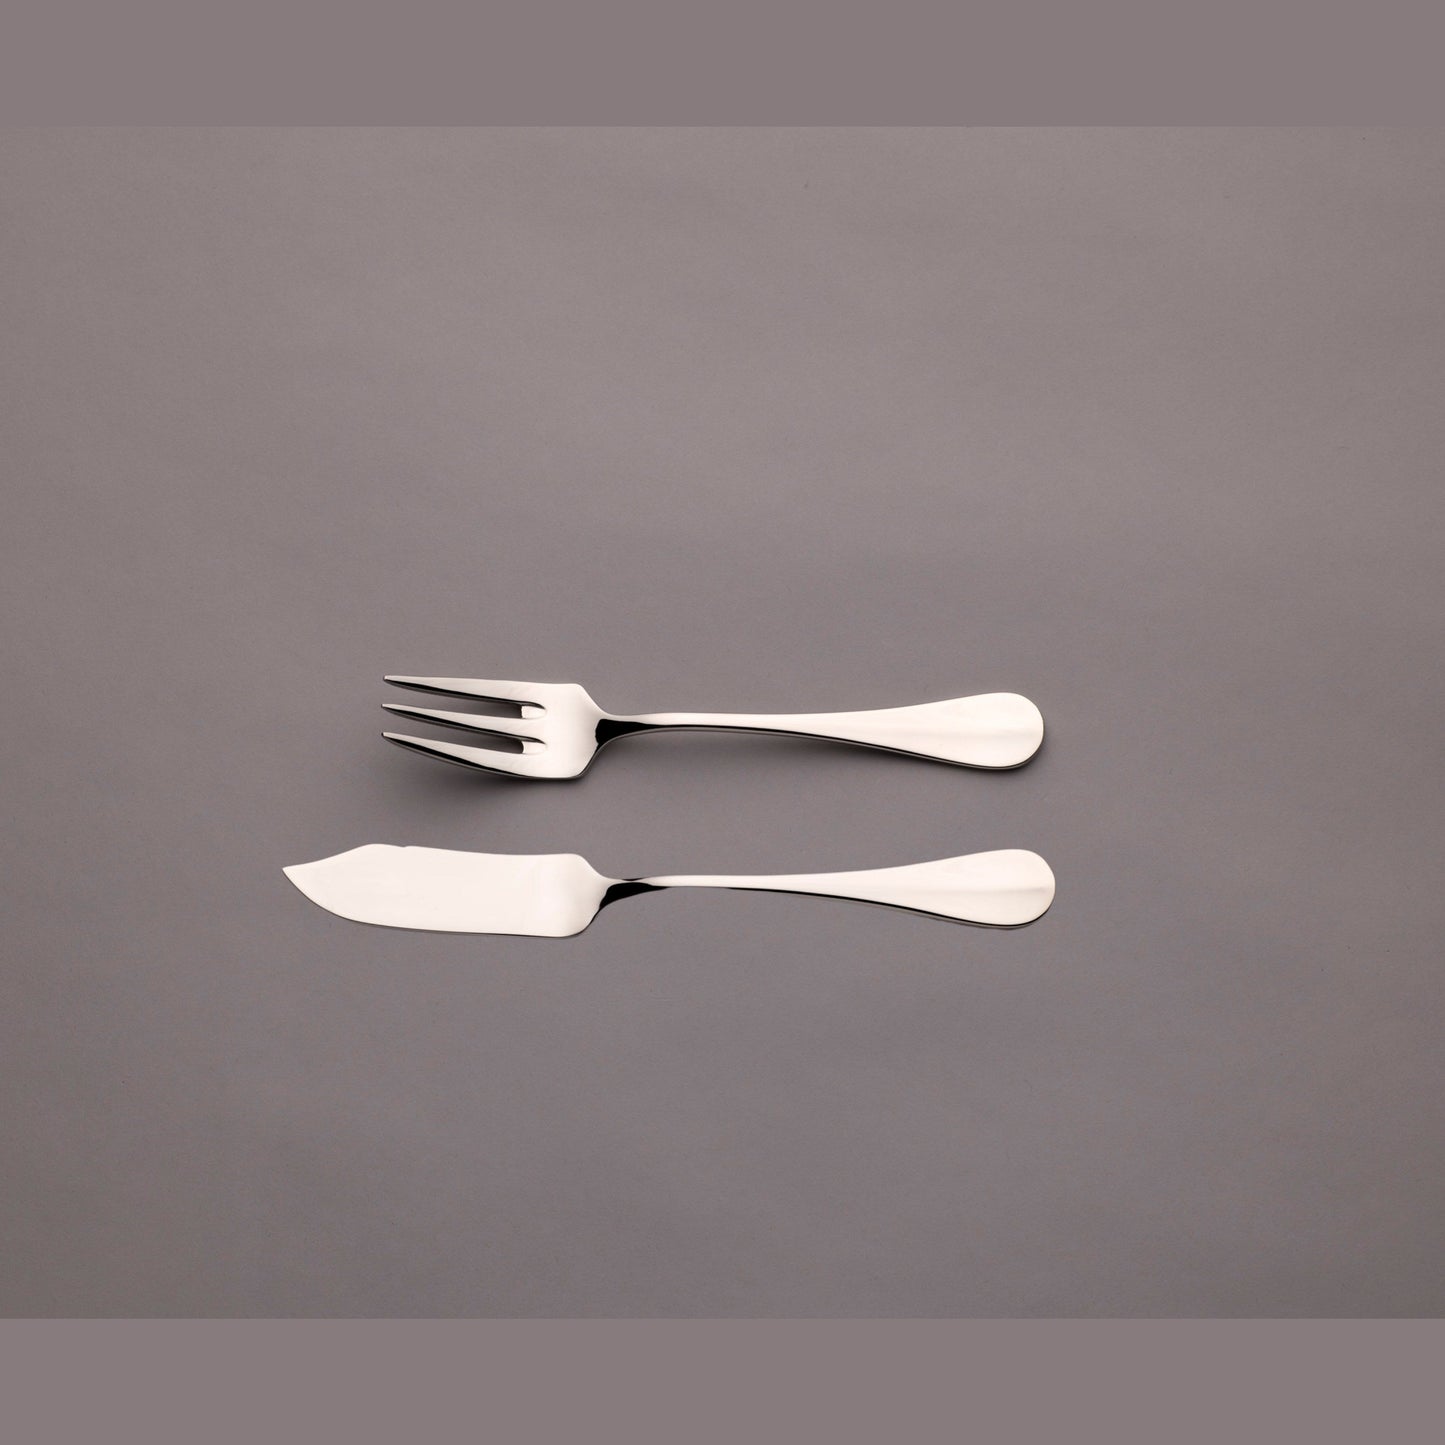 Old English stainless steel flatware cutlery